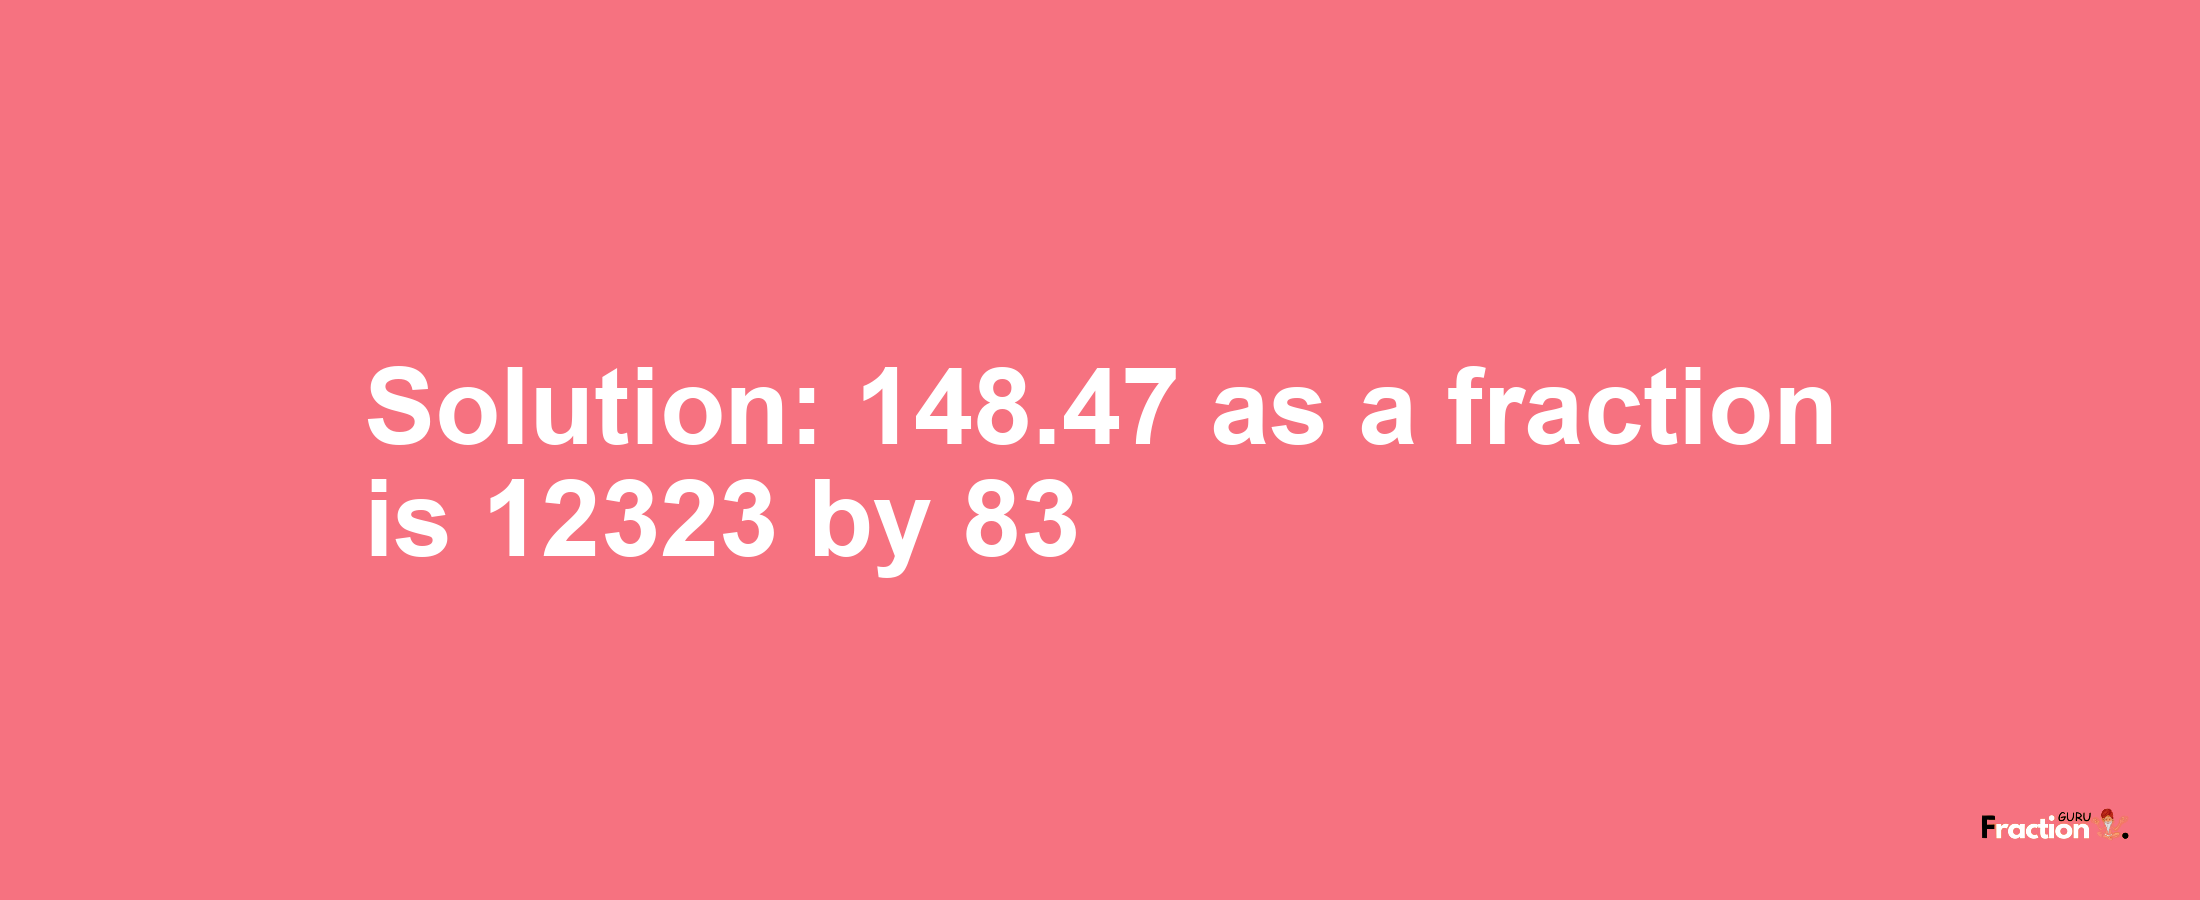 Solution:148.47 as a fraction is 12323/83